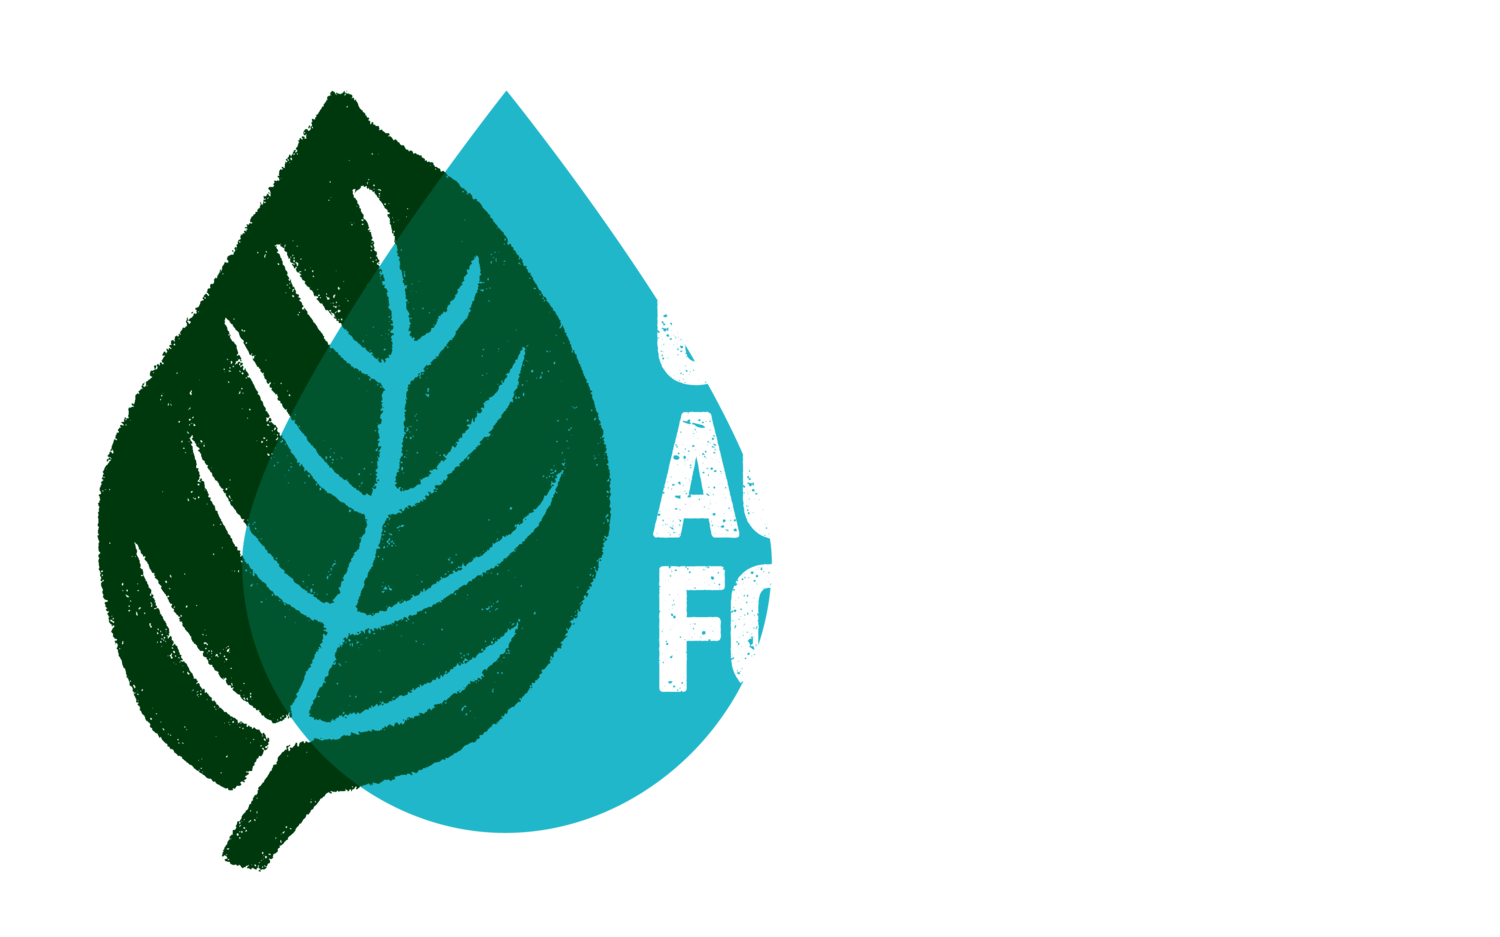 Community Action for Water